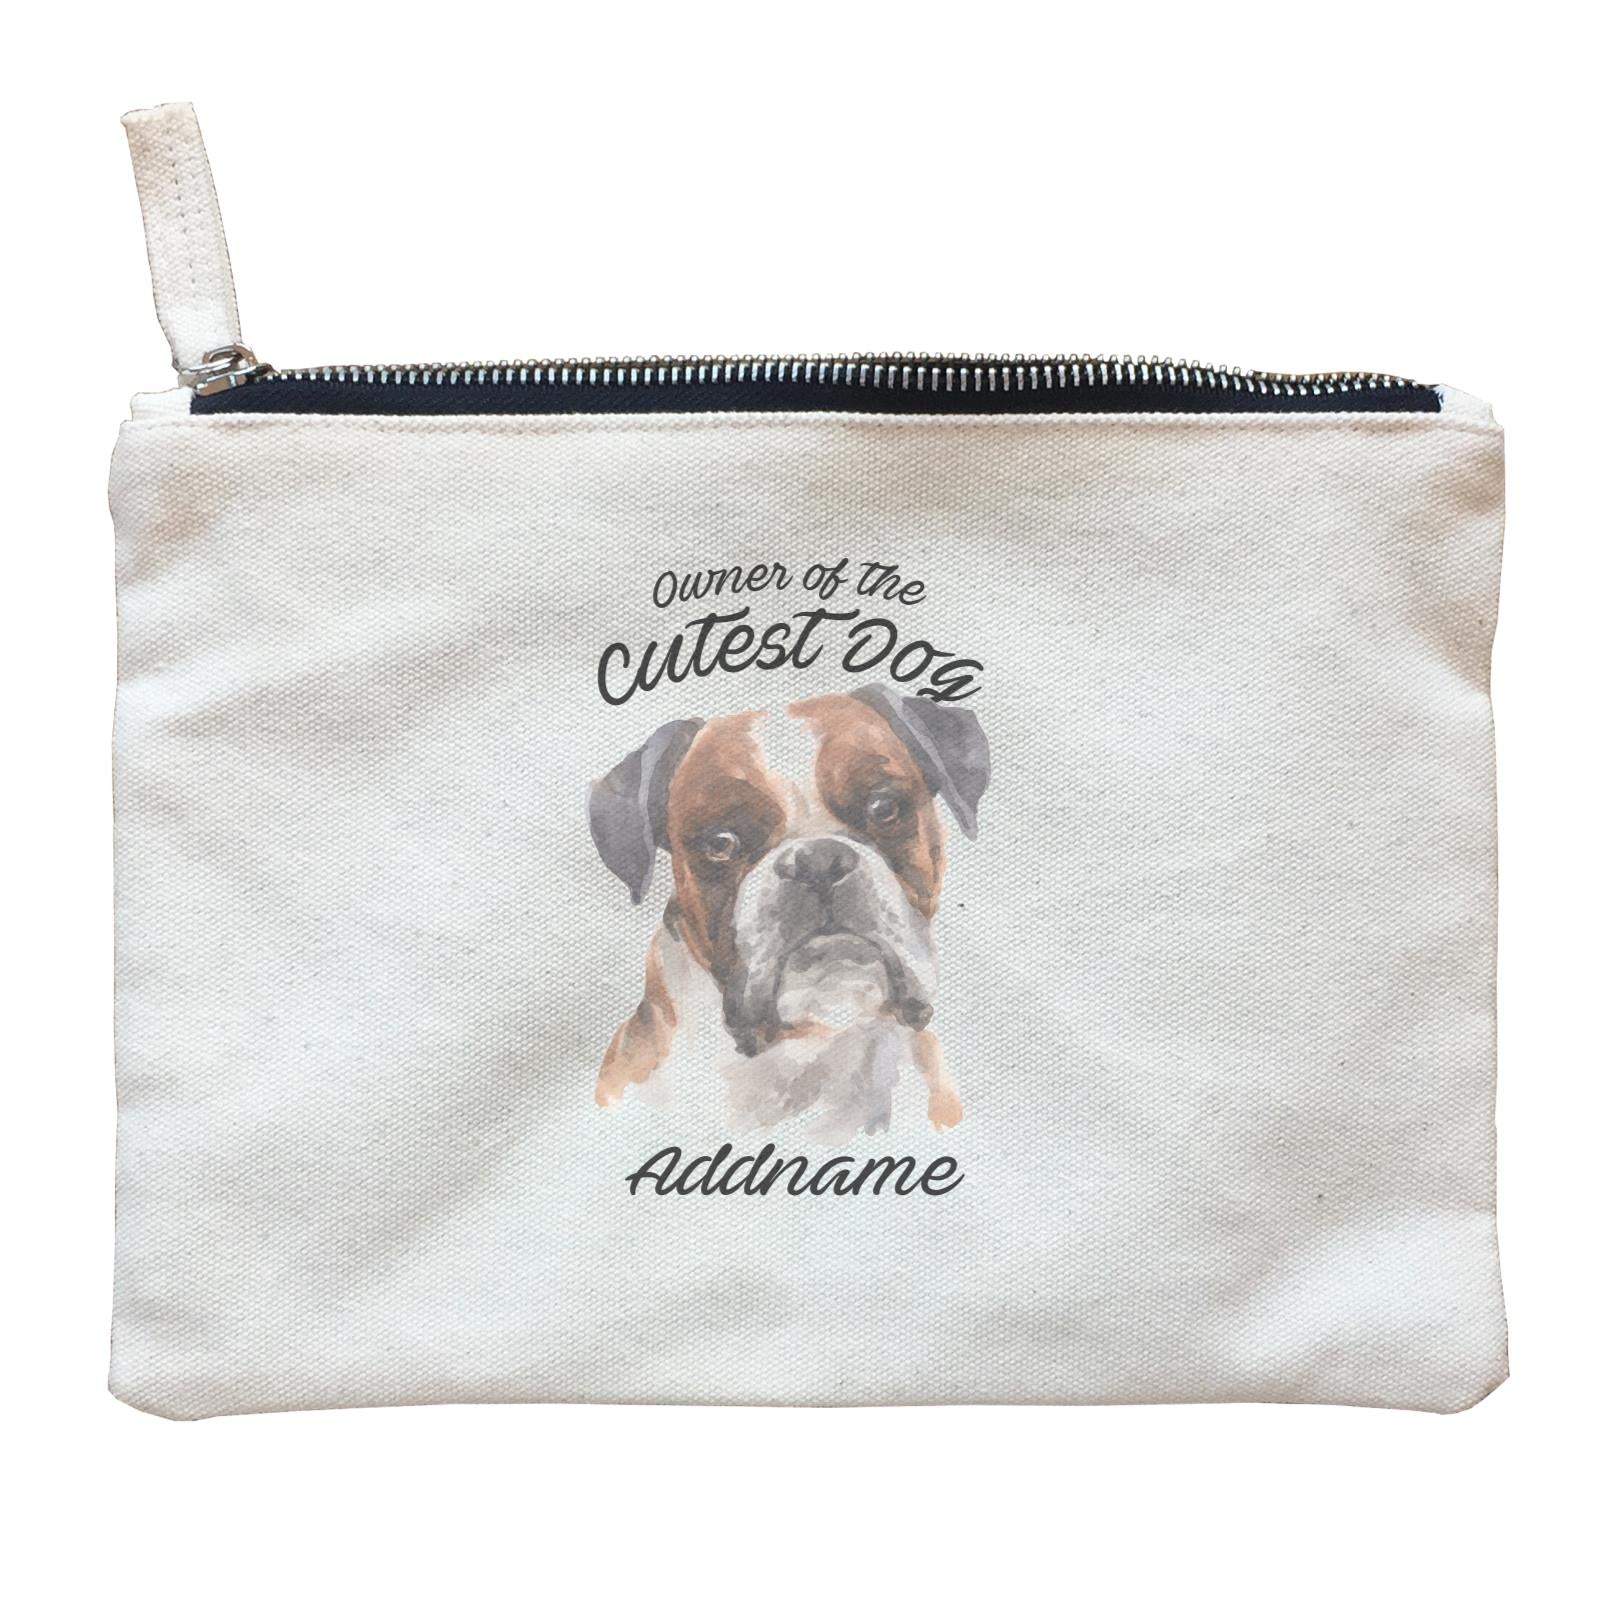 Watercolor Dog Owner Of The Cutest Dog Boxer Black Ears Addname Zipper Pouch